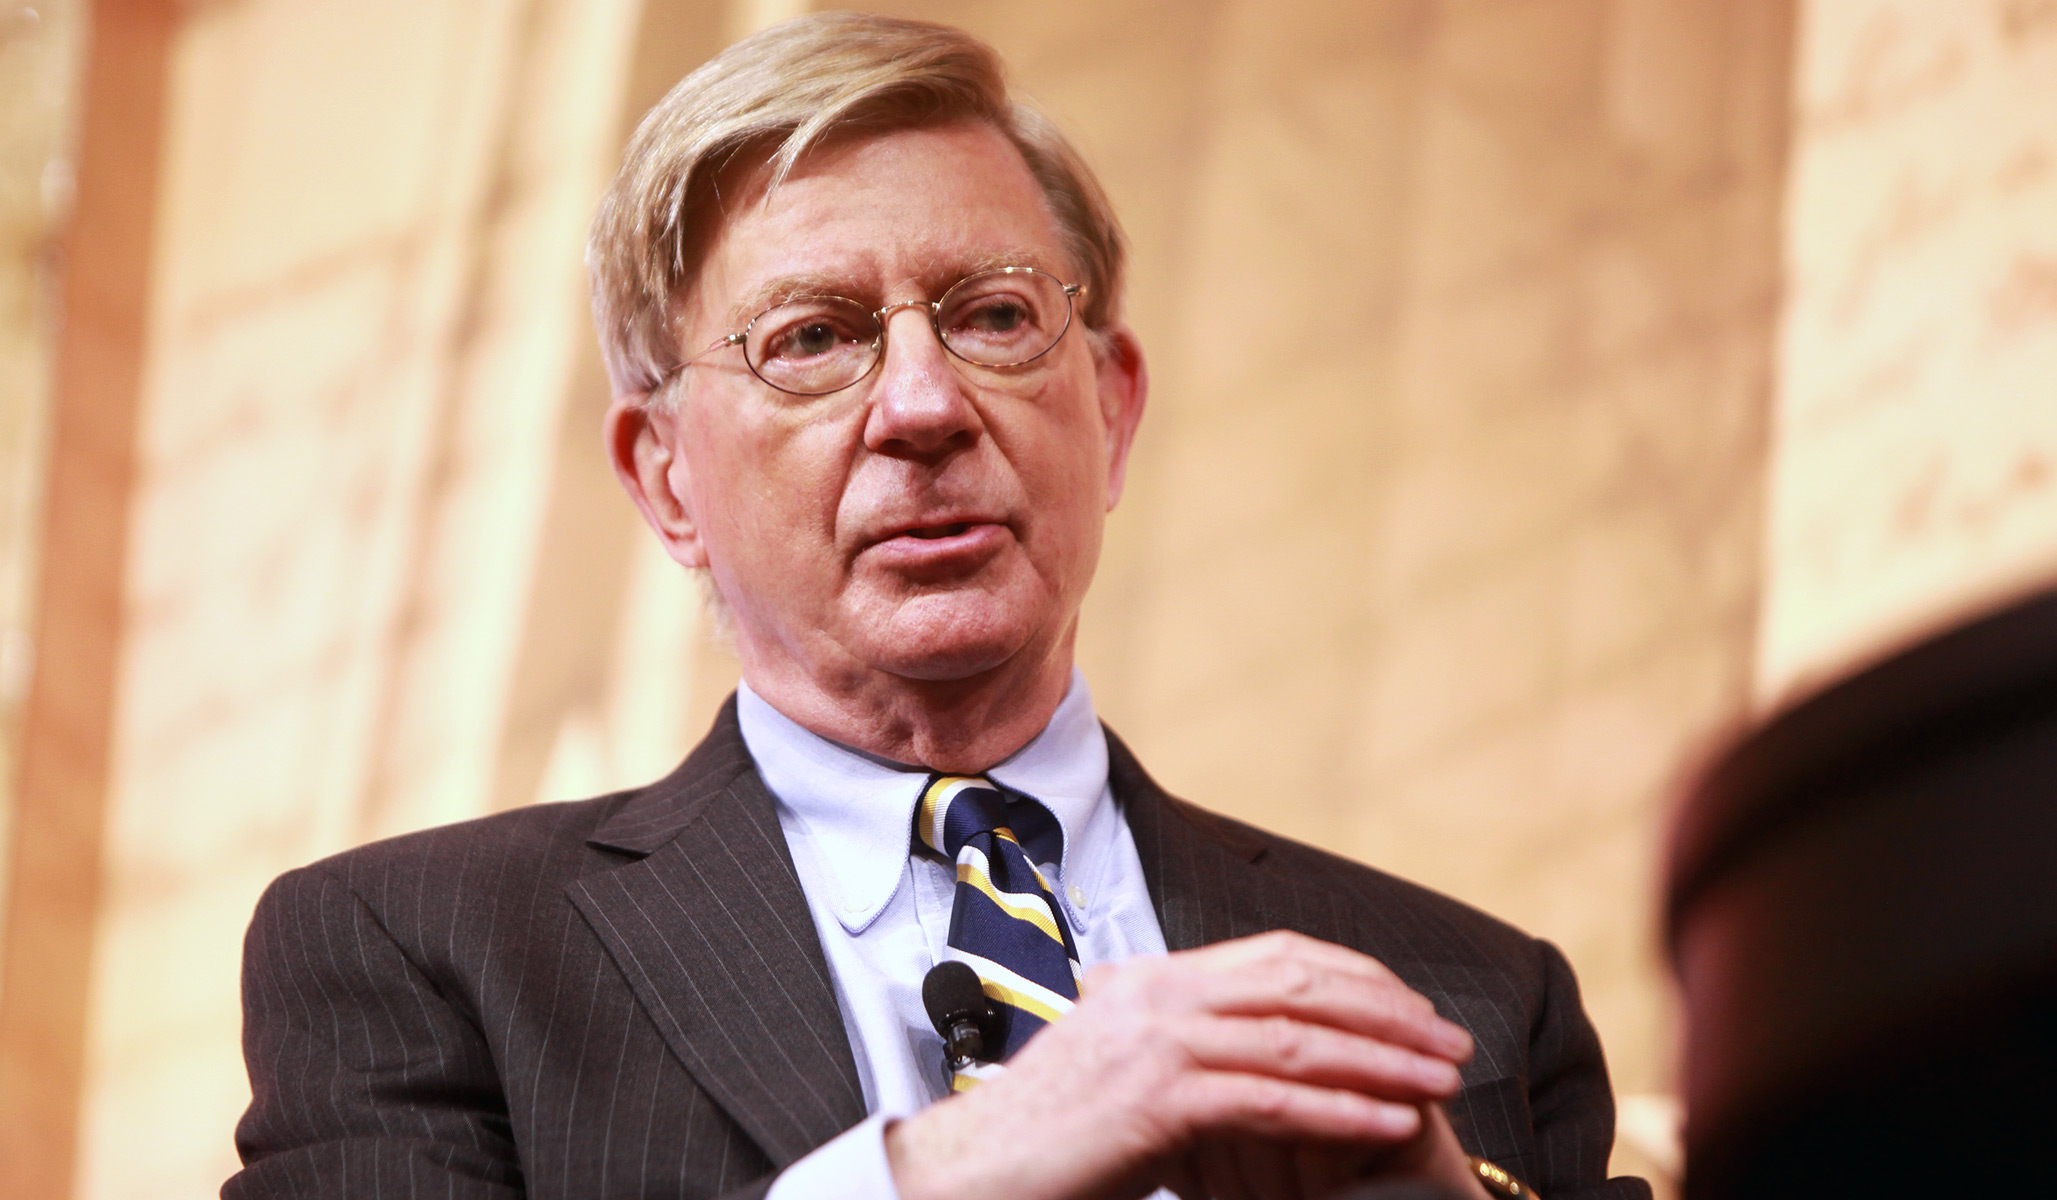 George Will in Top Form against Democrats’ Buyback Demagoguery | National Review